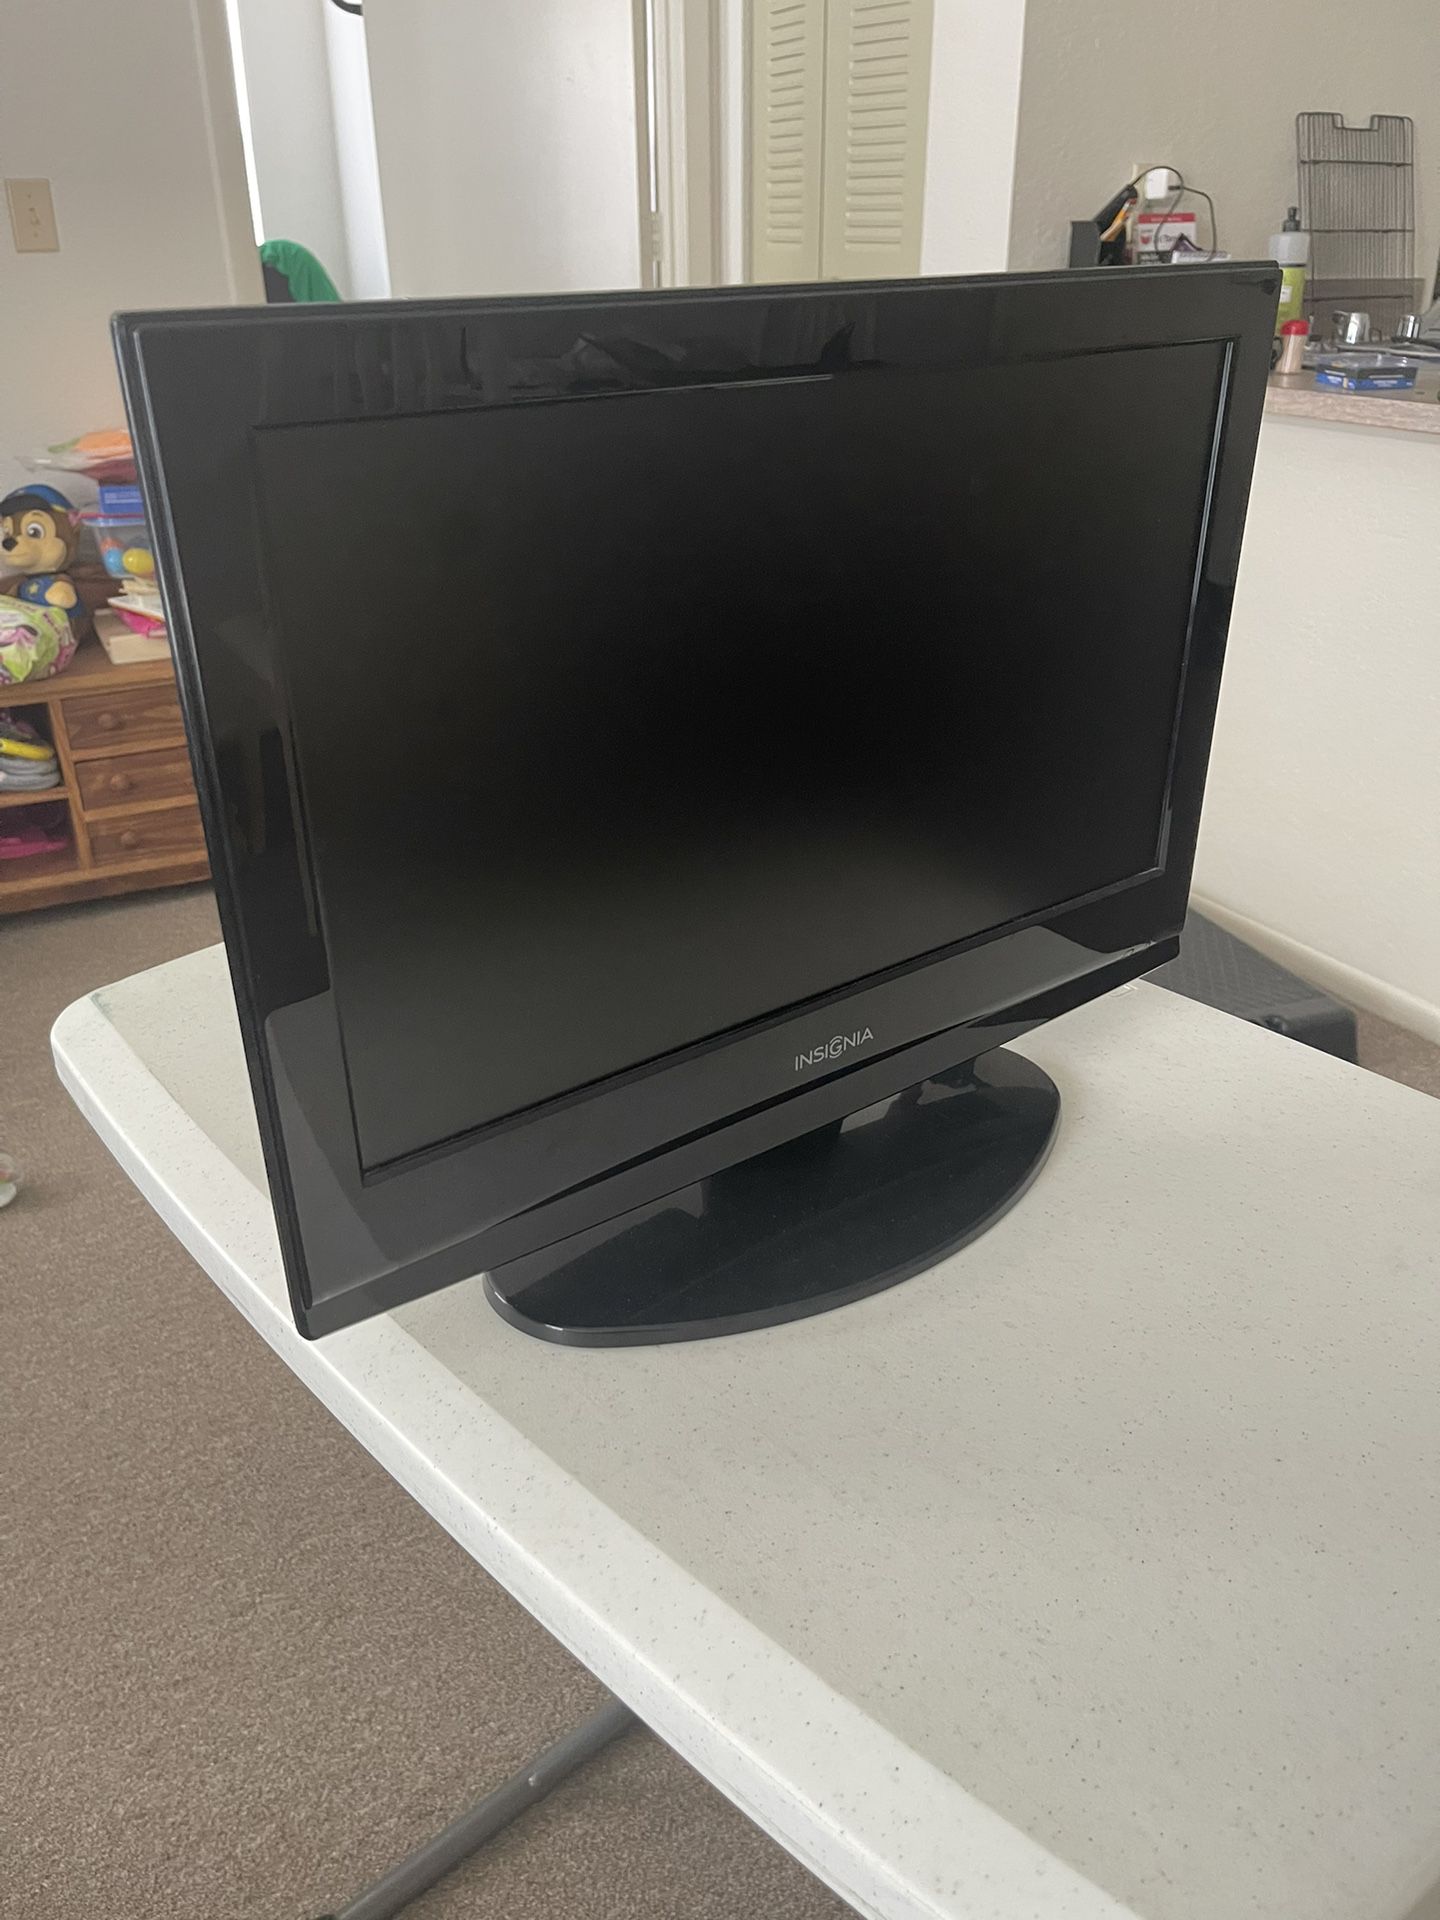 Insignia 19” TV with built in DVD player